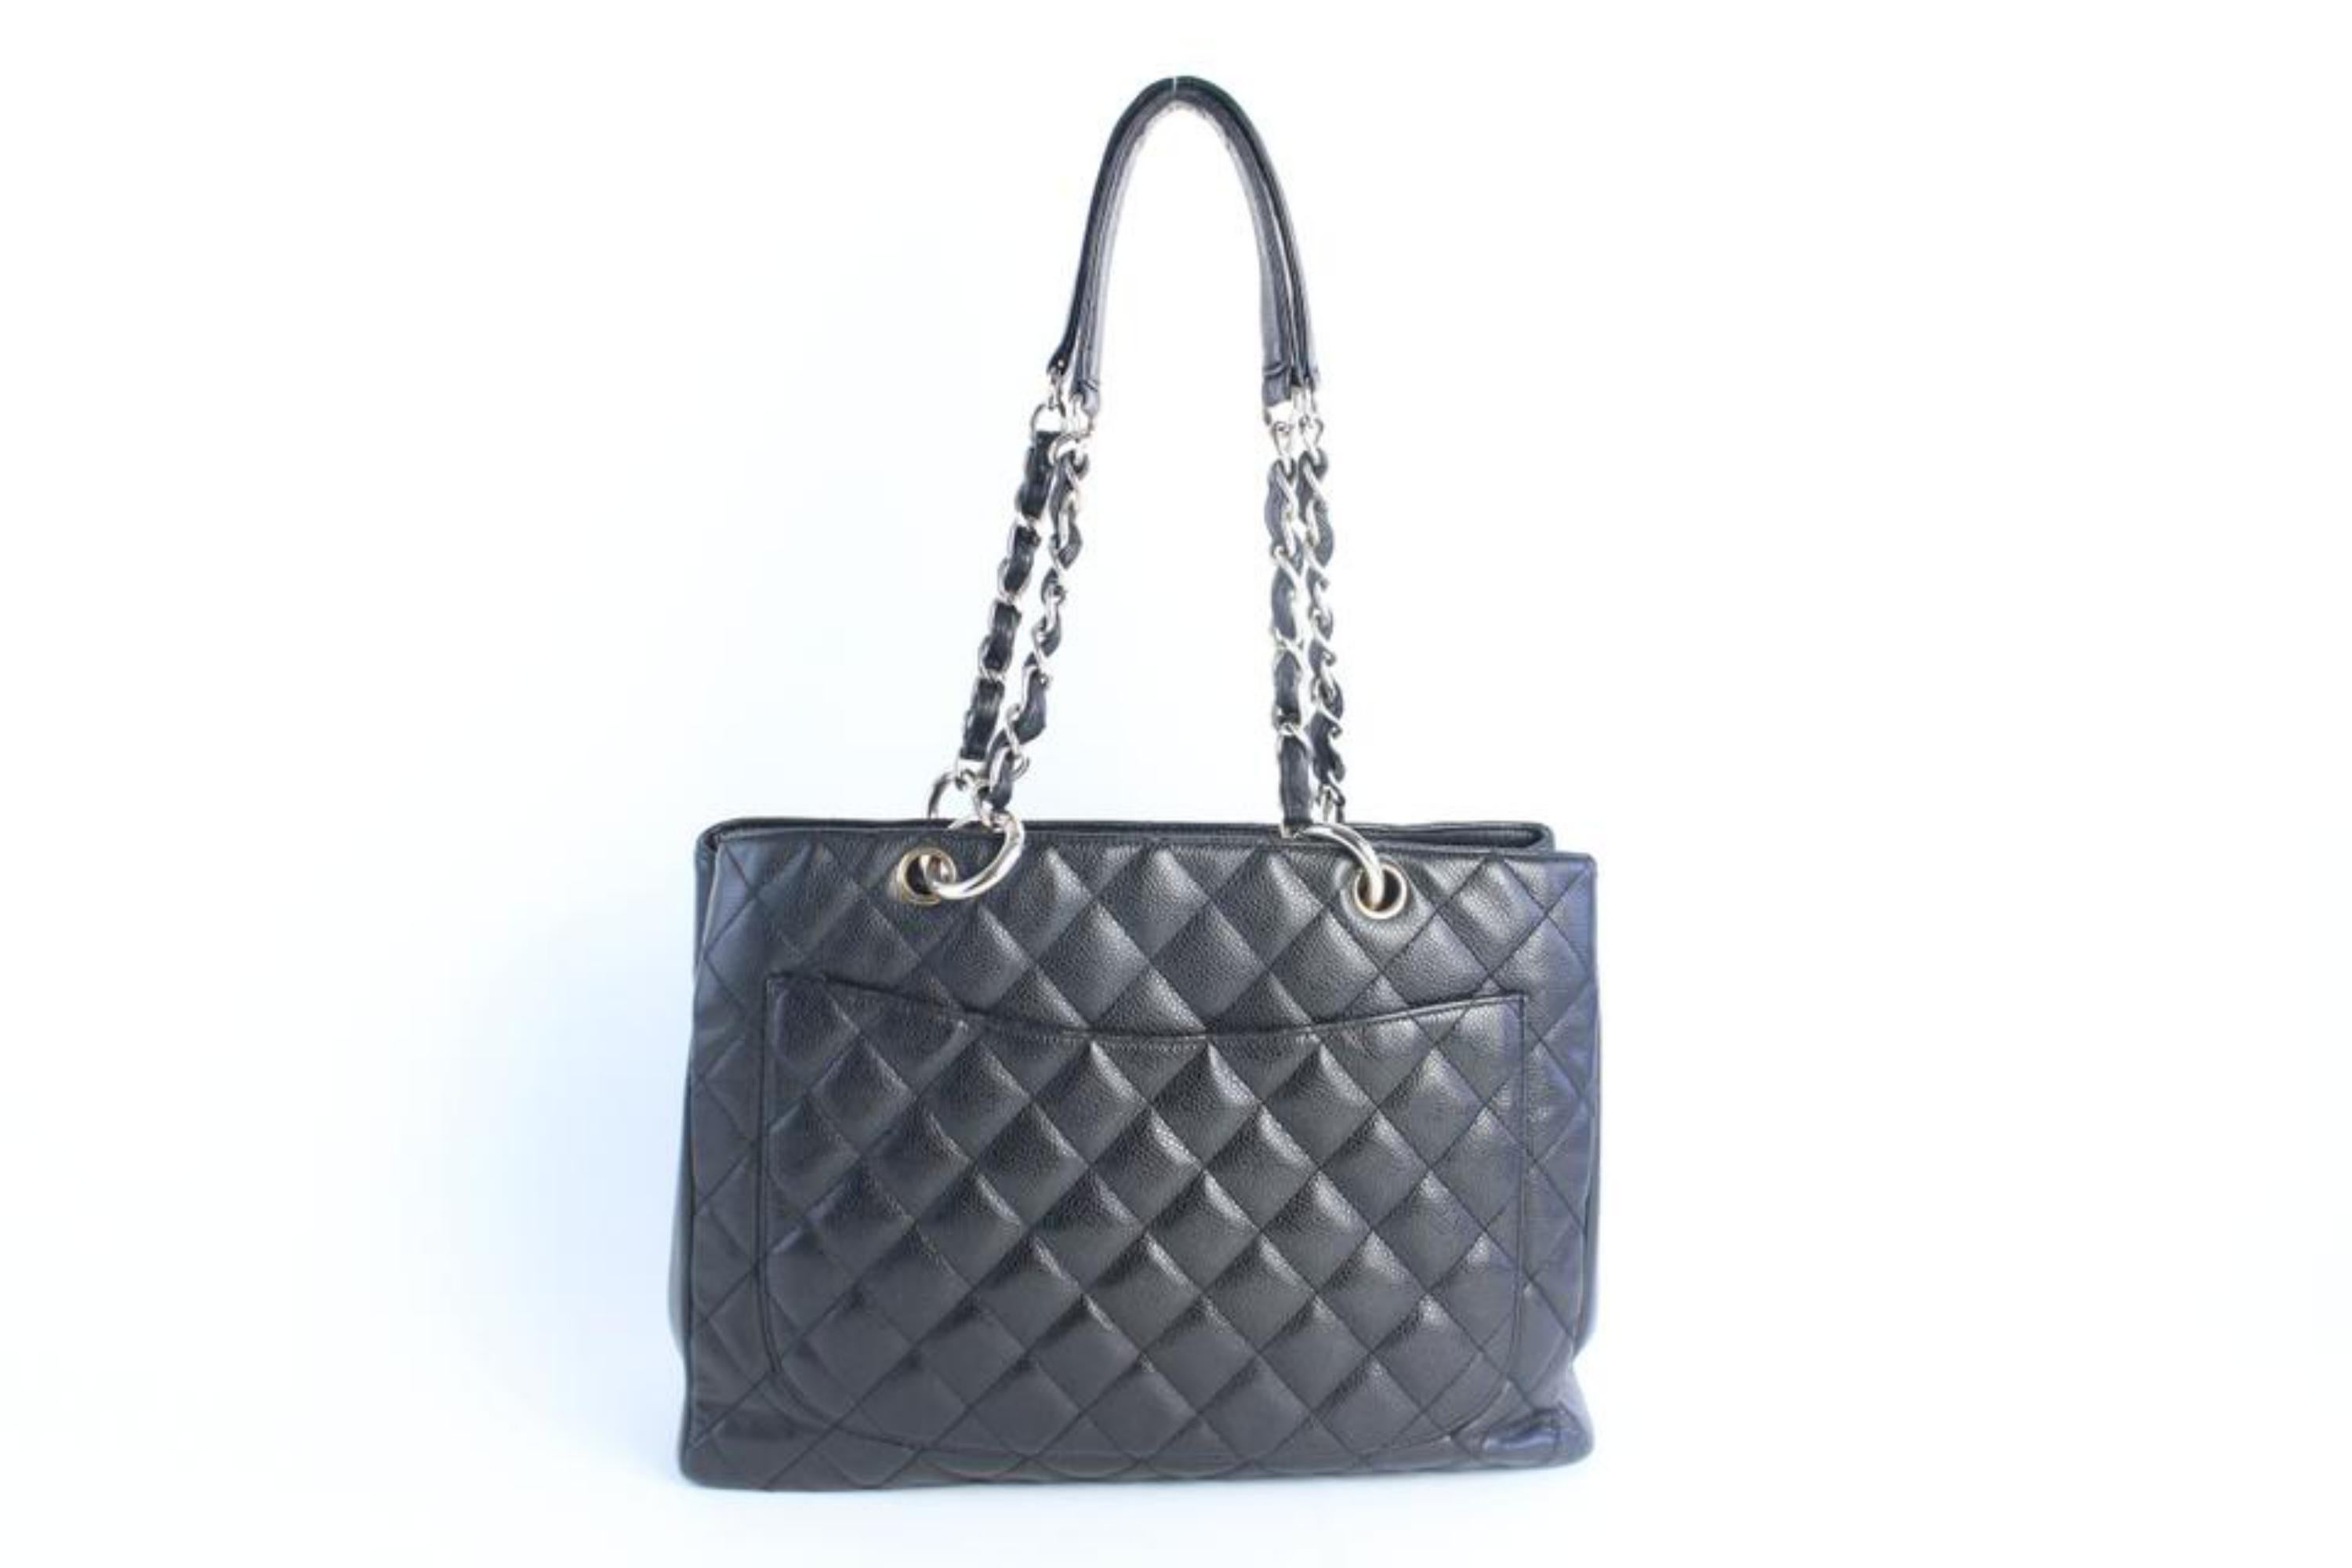 Chanel Shopping Tote Quilted Gst 17cz0828 Black Leather Shoulder Bag ...